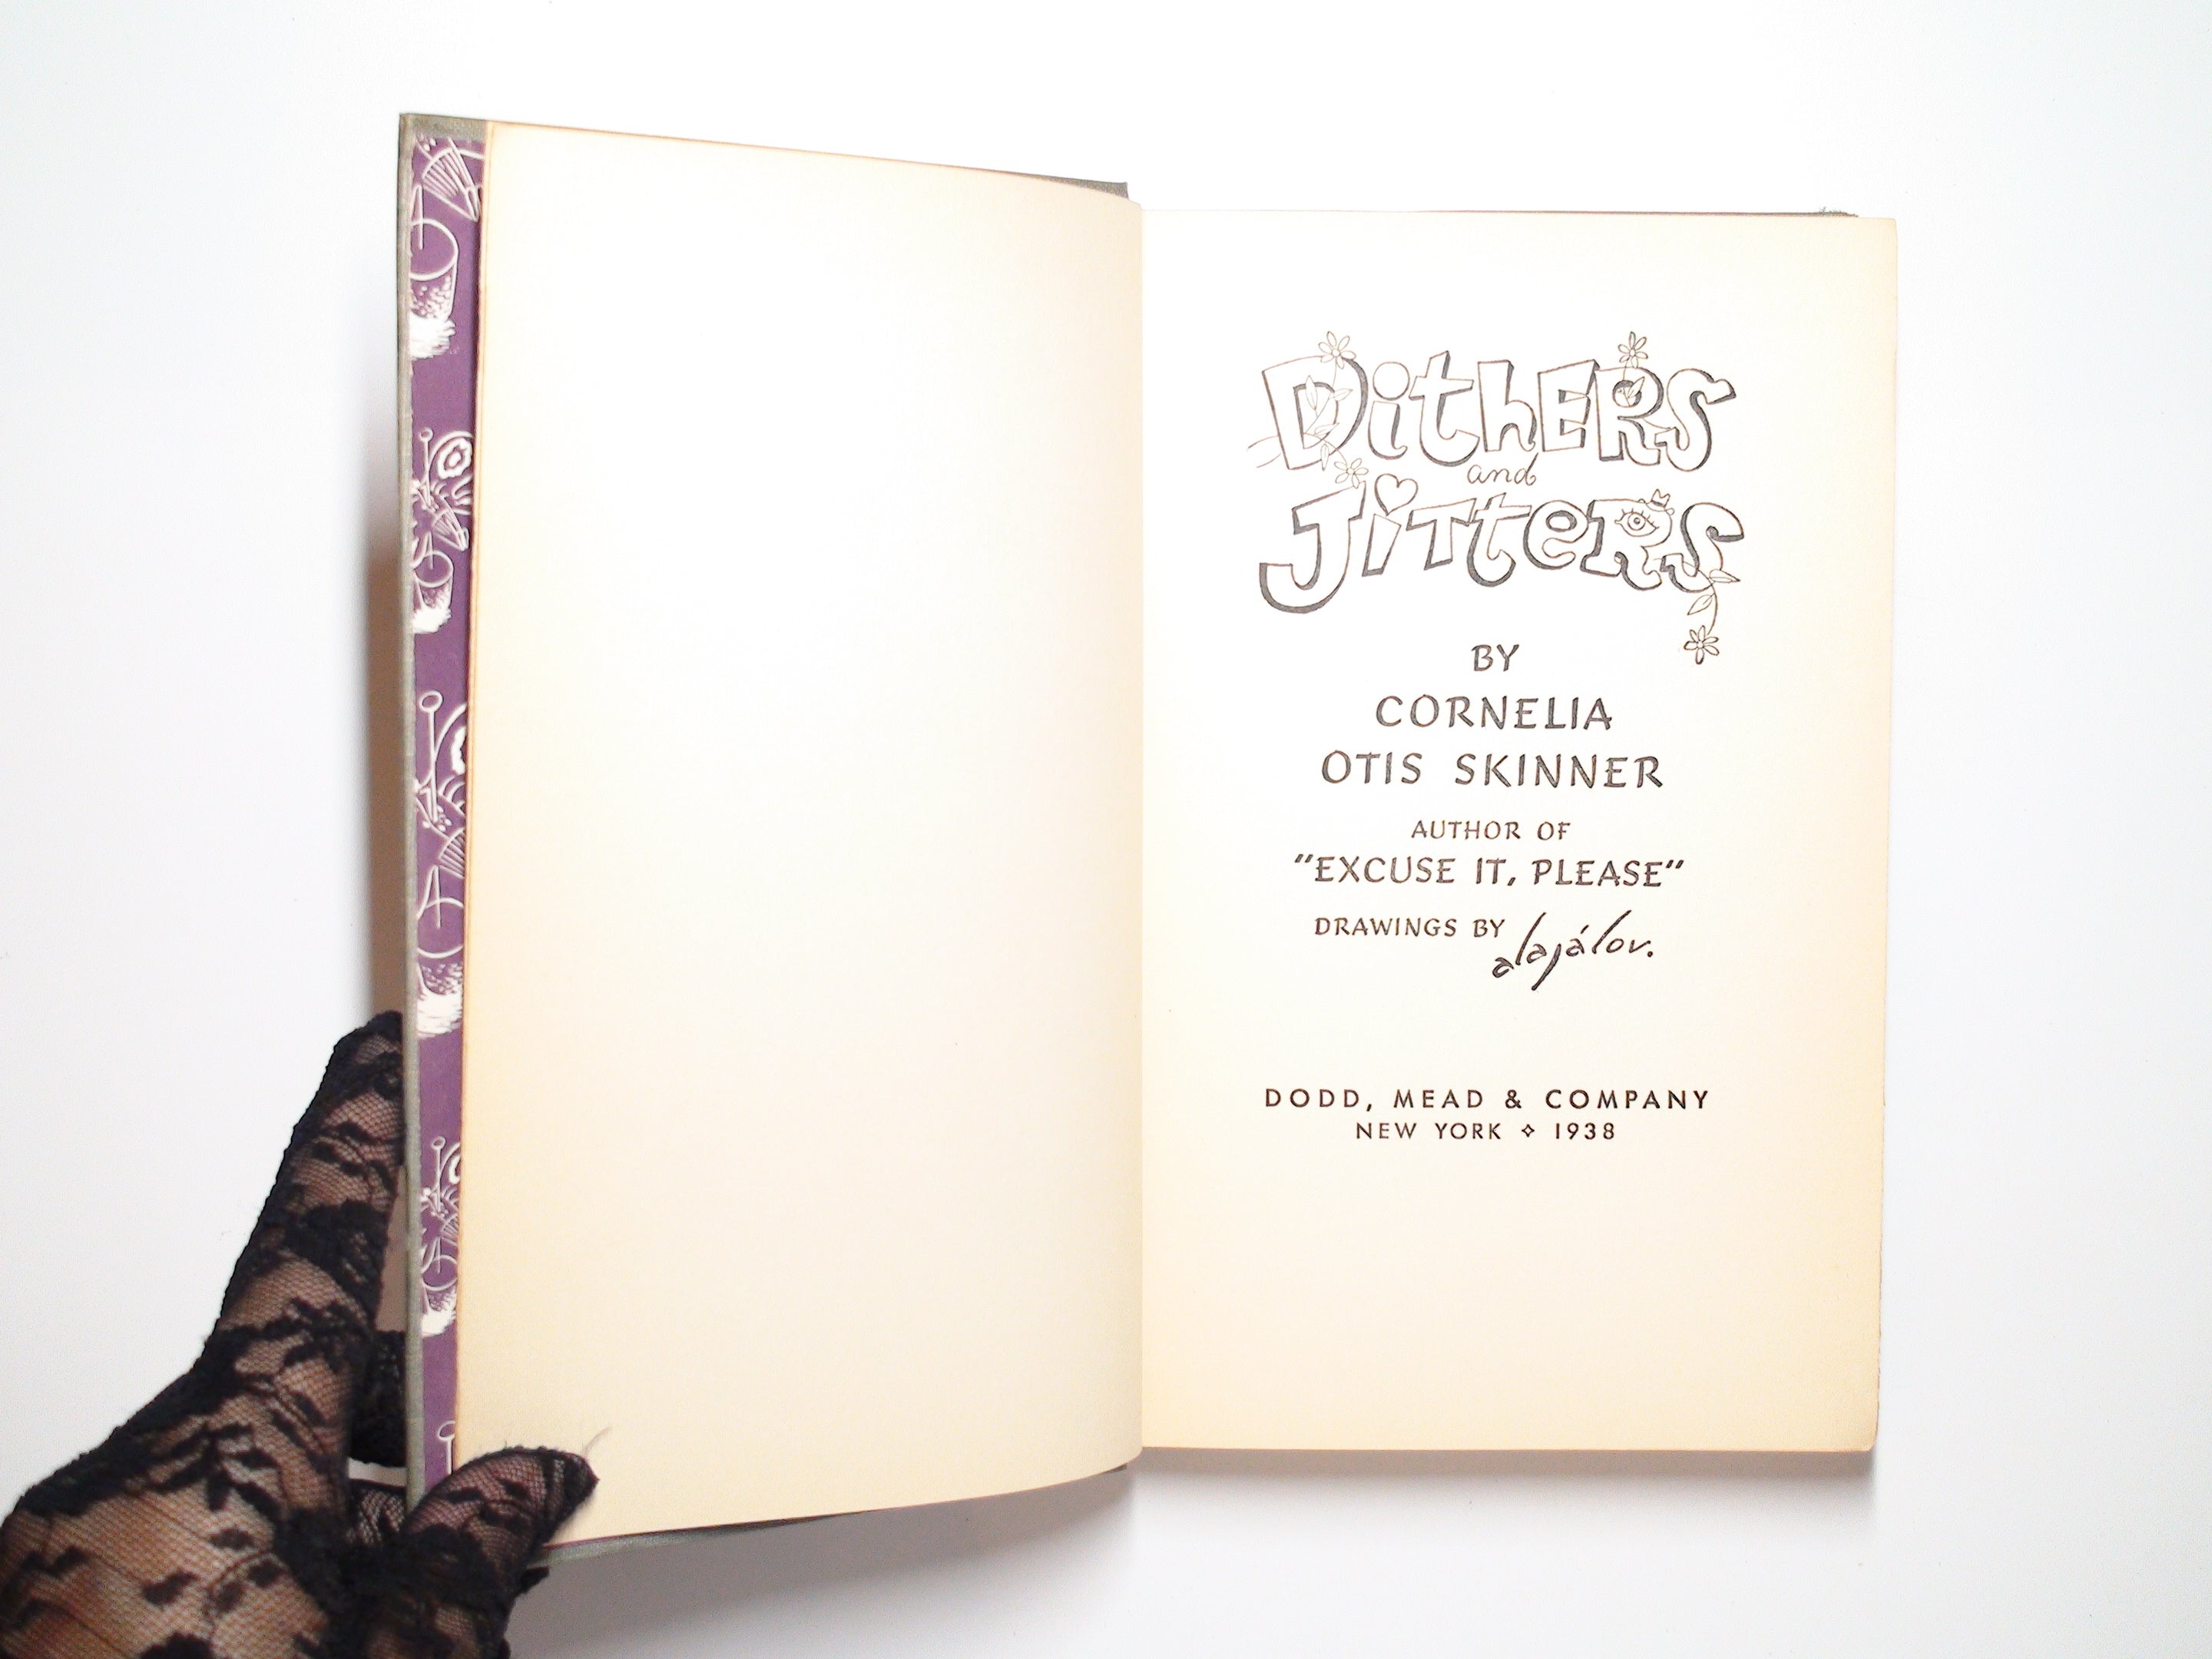 Dithers and Jitters by Cornelia Otis Skinner, Illustrated, 2nd Printing, 1938